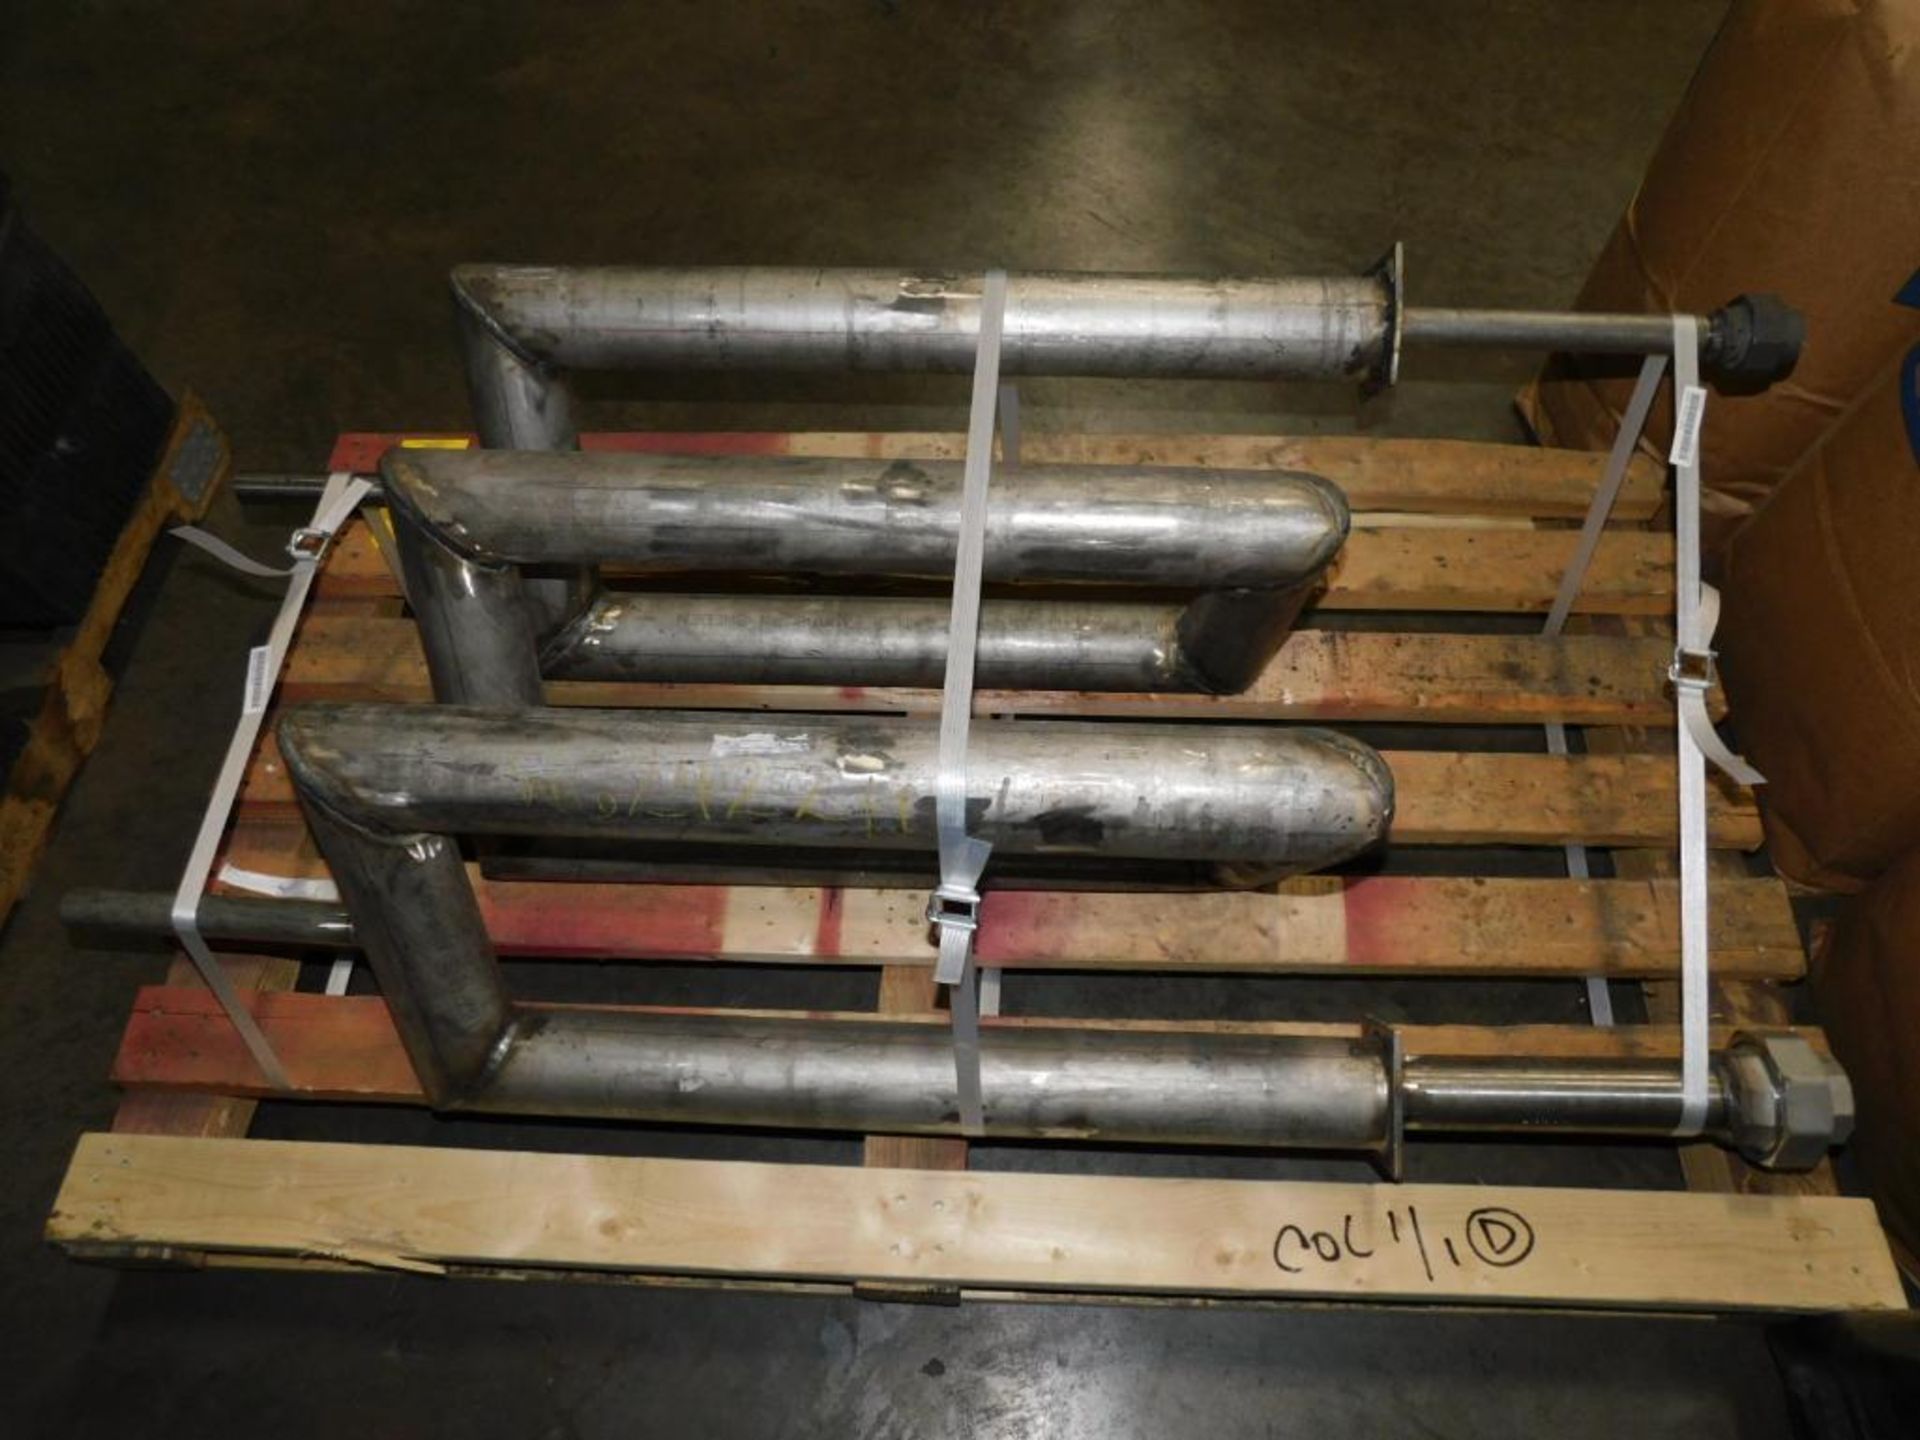 New Retort for CI Hayes Ammonia Dissociator described in Lot 12, Inconel Construction, Recently purc - Image 6 of 9